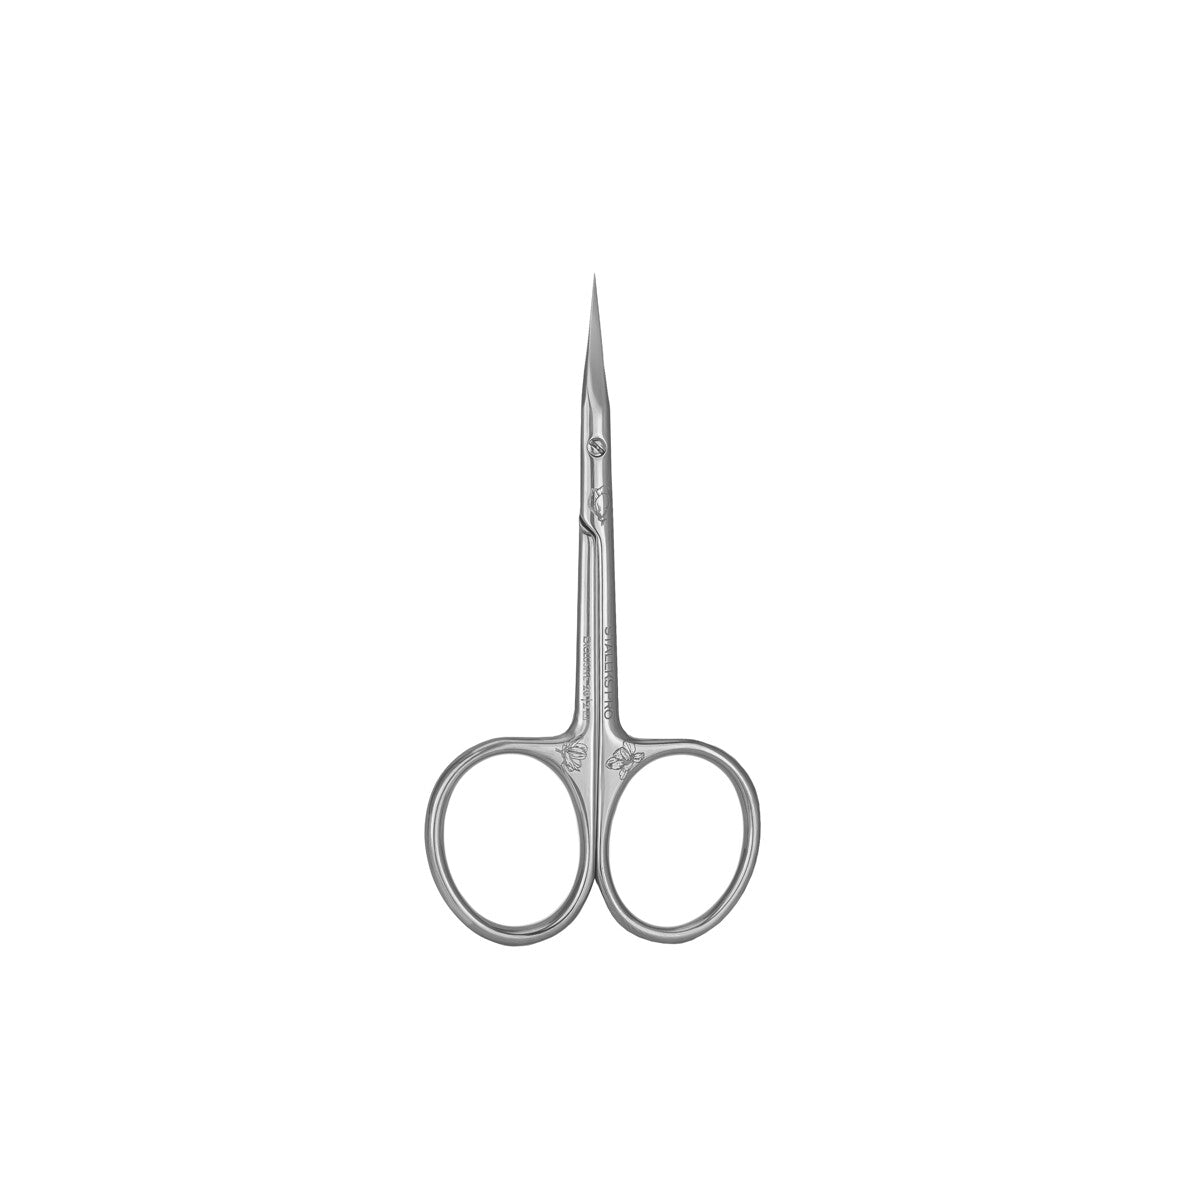    Staleks_Professional_cuticle_scissors_Exc._20_TYPE_2_Magnol._SX-20_2M_5 product view front